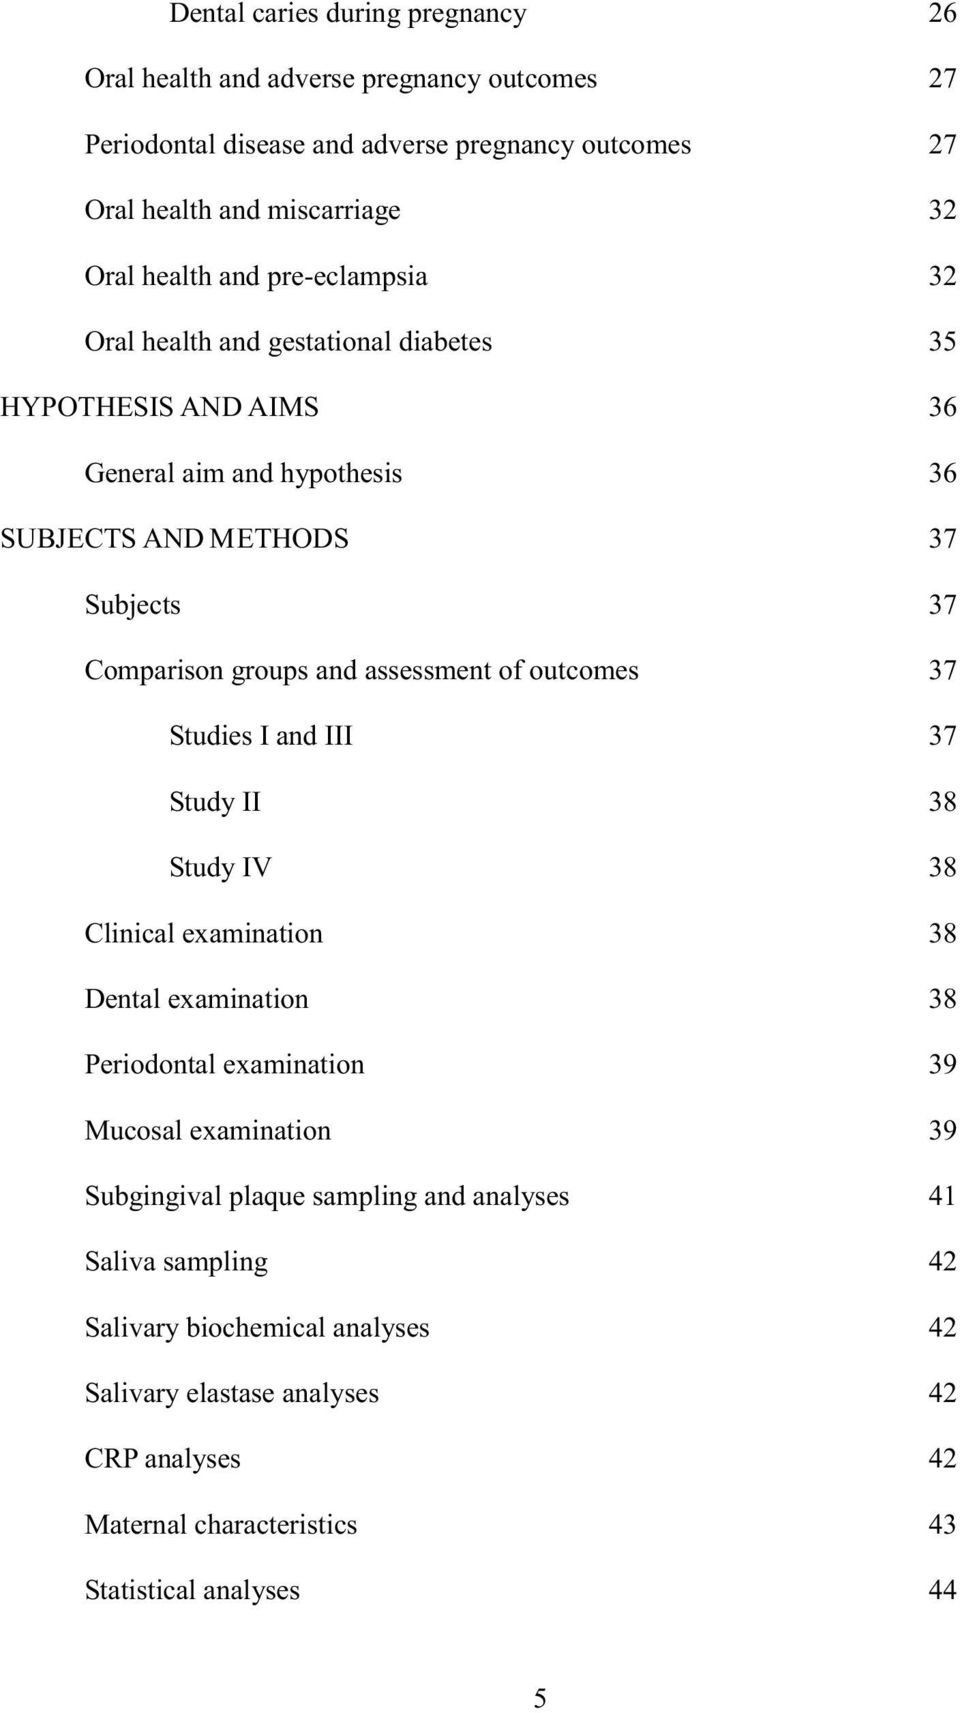 assessment of outcomes 37 Studies I and III 37 Study II 38 Study IV 38 Clinical examination 38 Dental examination 38 Periodontal examination 39 Mucosal examination 39